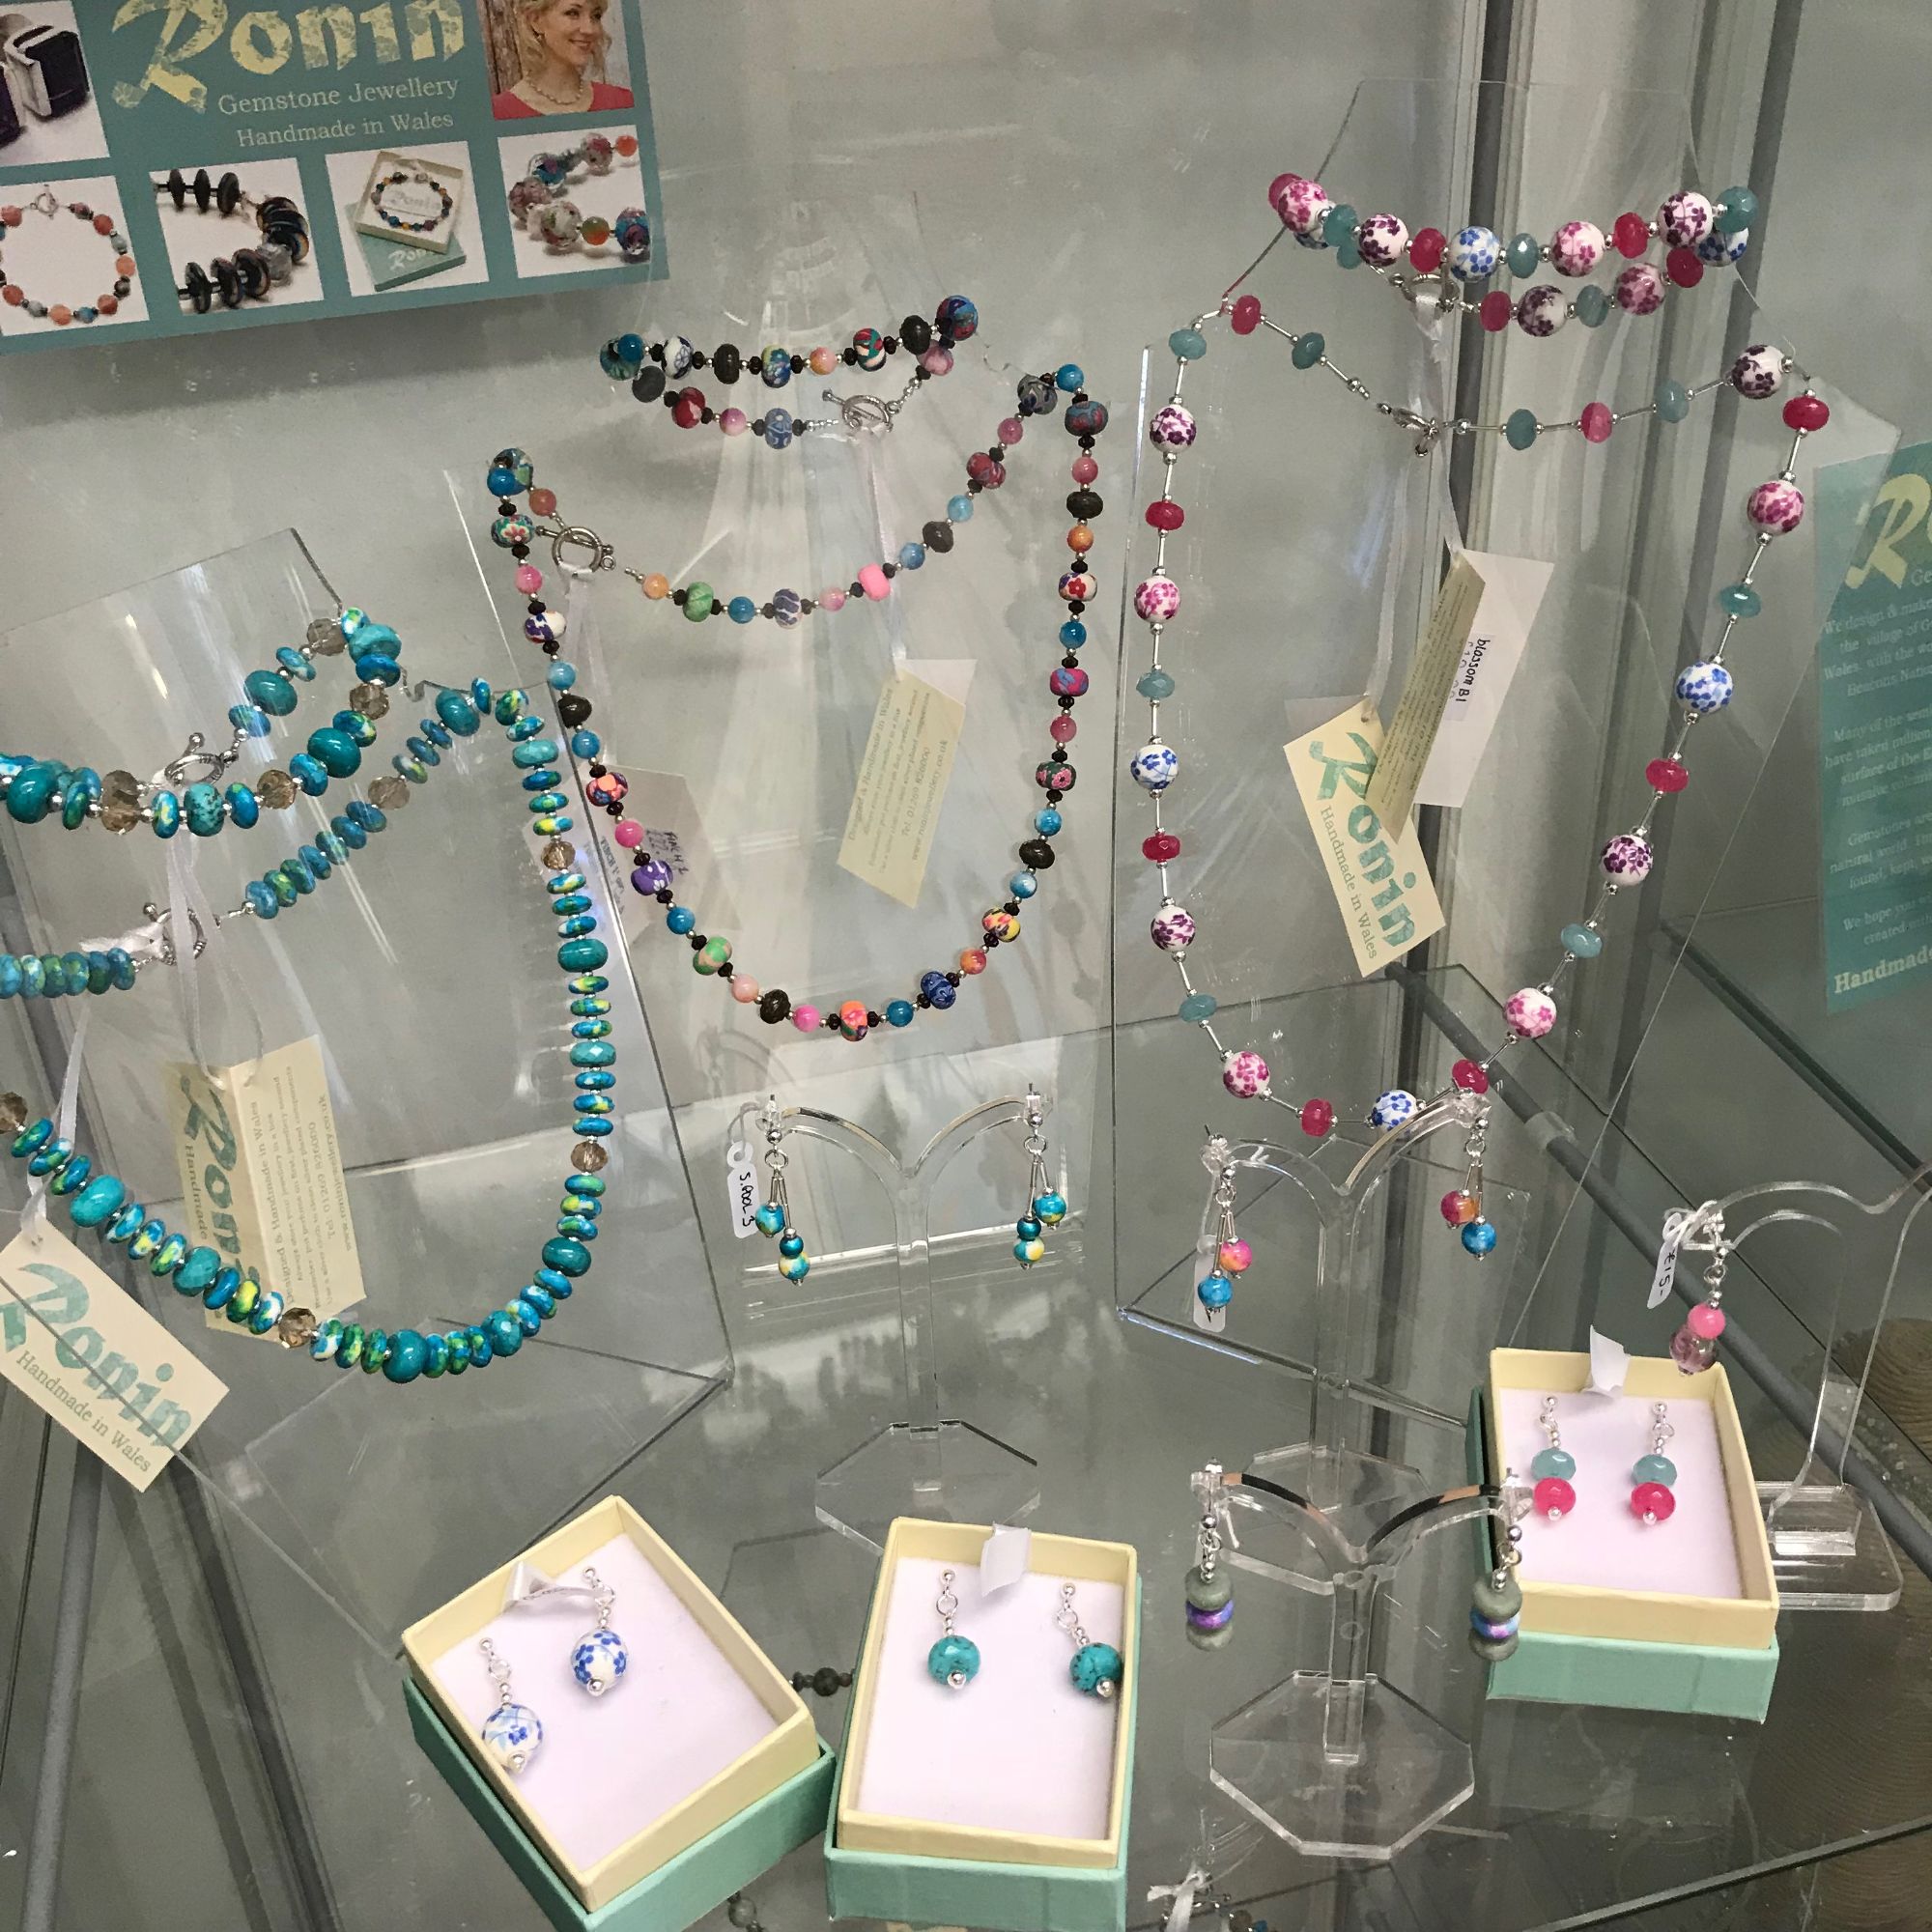 Ronin jewellery includes semi precious stones and is made in Wales